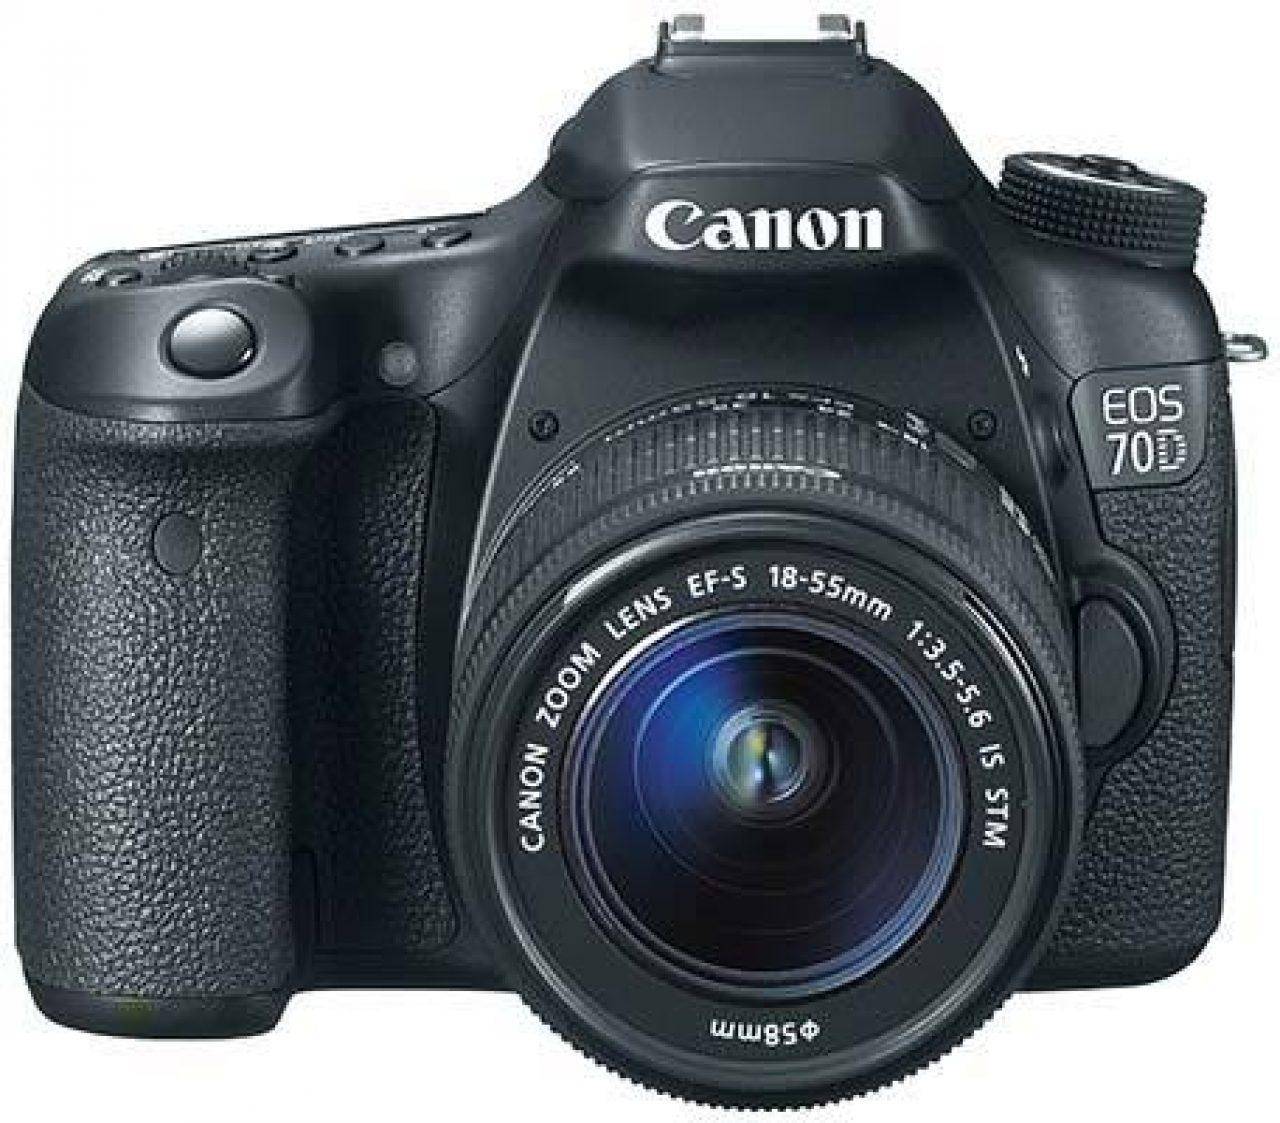 Canon Professional Digital SLR Camera EOS 70D with 18-55mm Lens (DAME) - Black